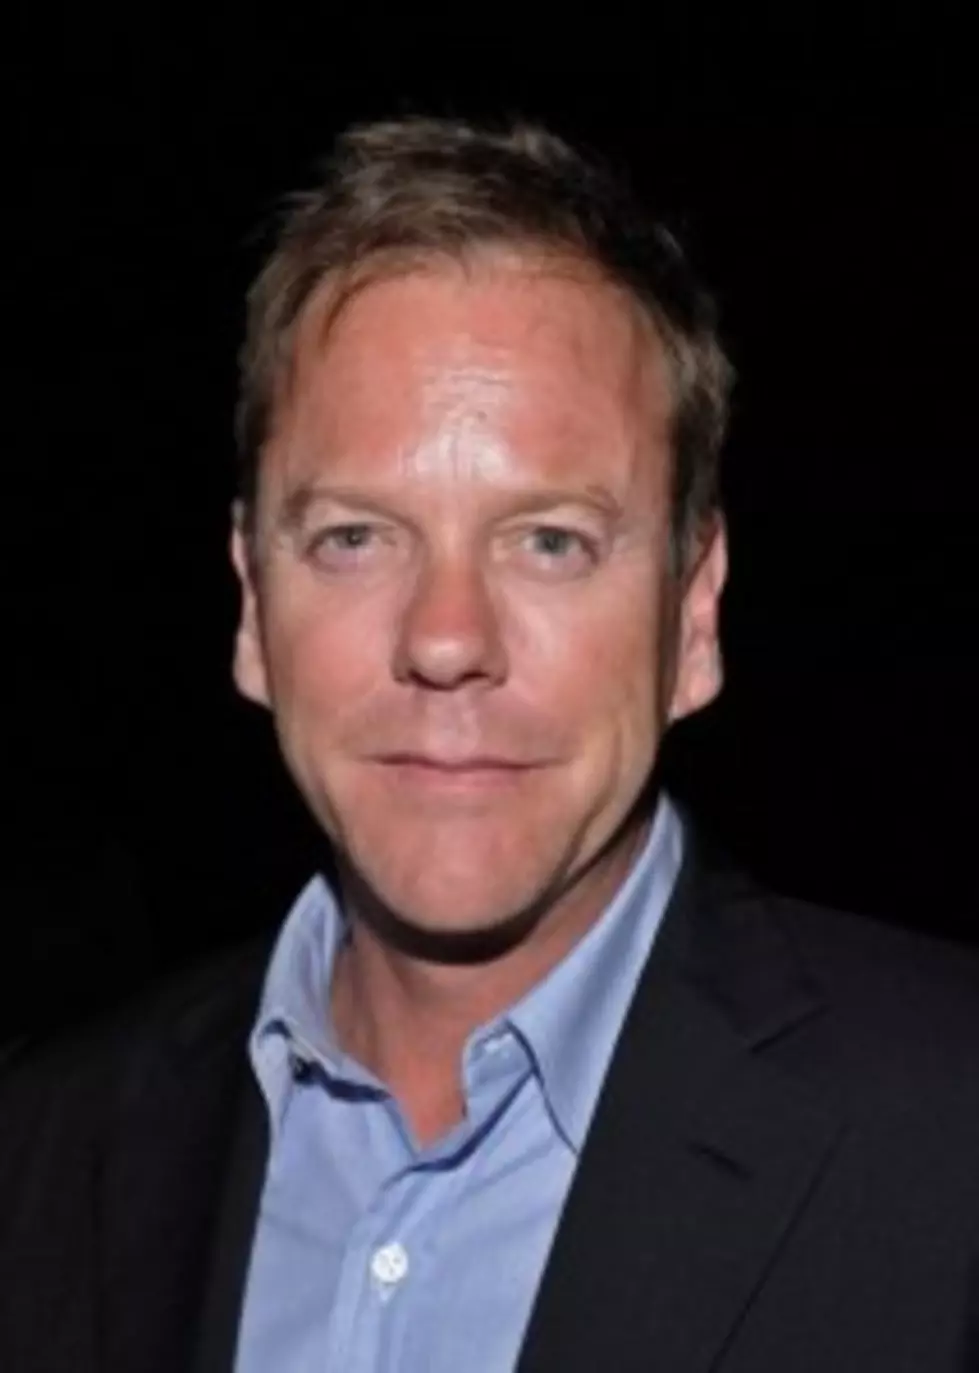 &#8220;The Simpsons&#8221; premieres with Kiefer Sutherland